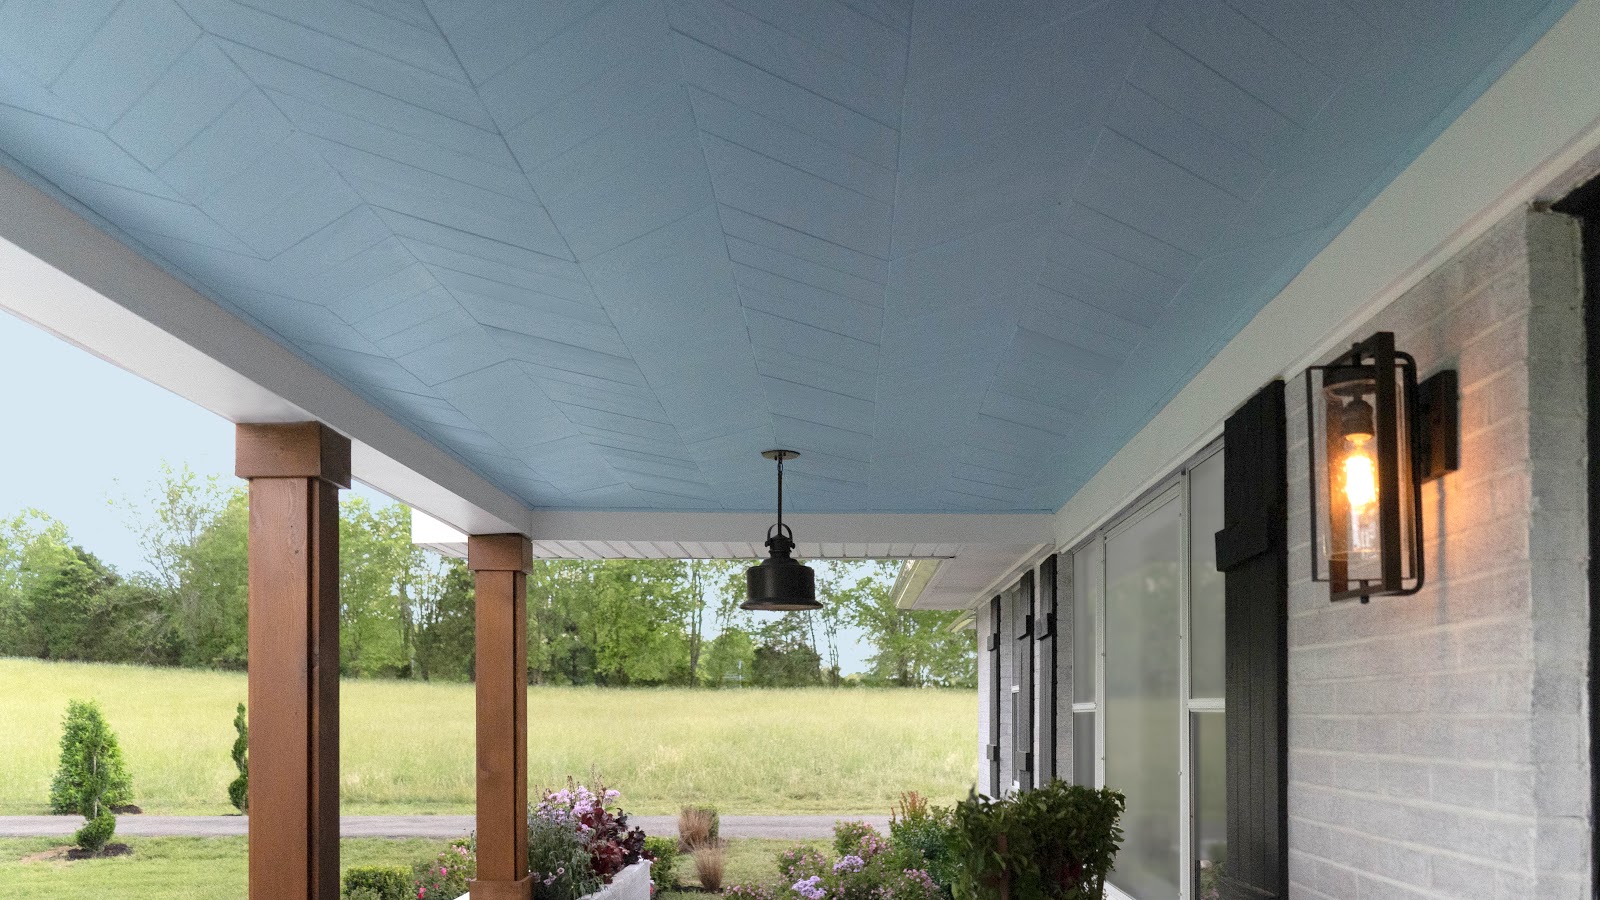 Painted chevron planks over a popcorn patio ceiling